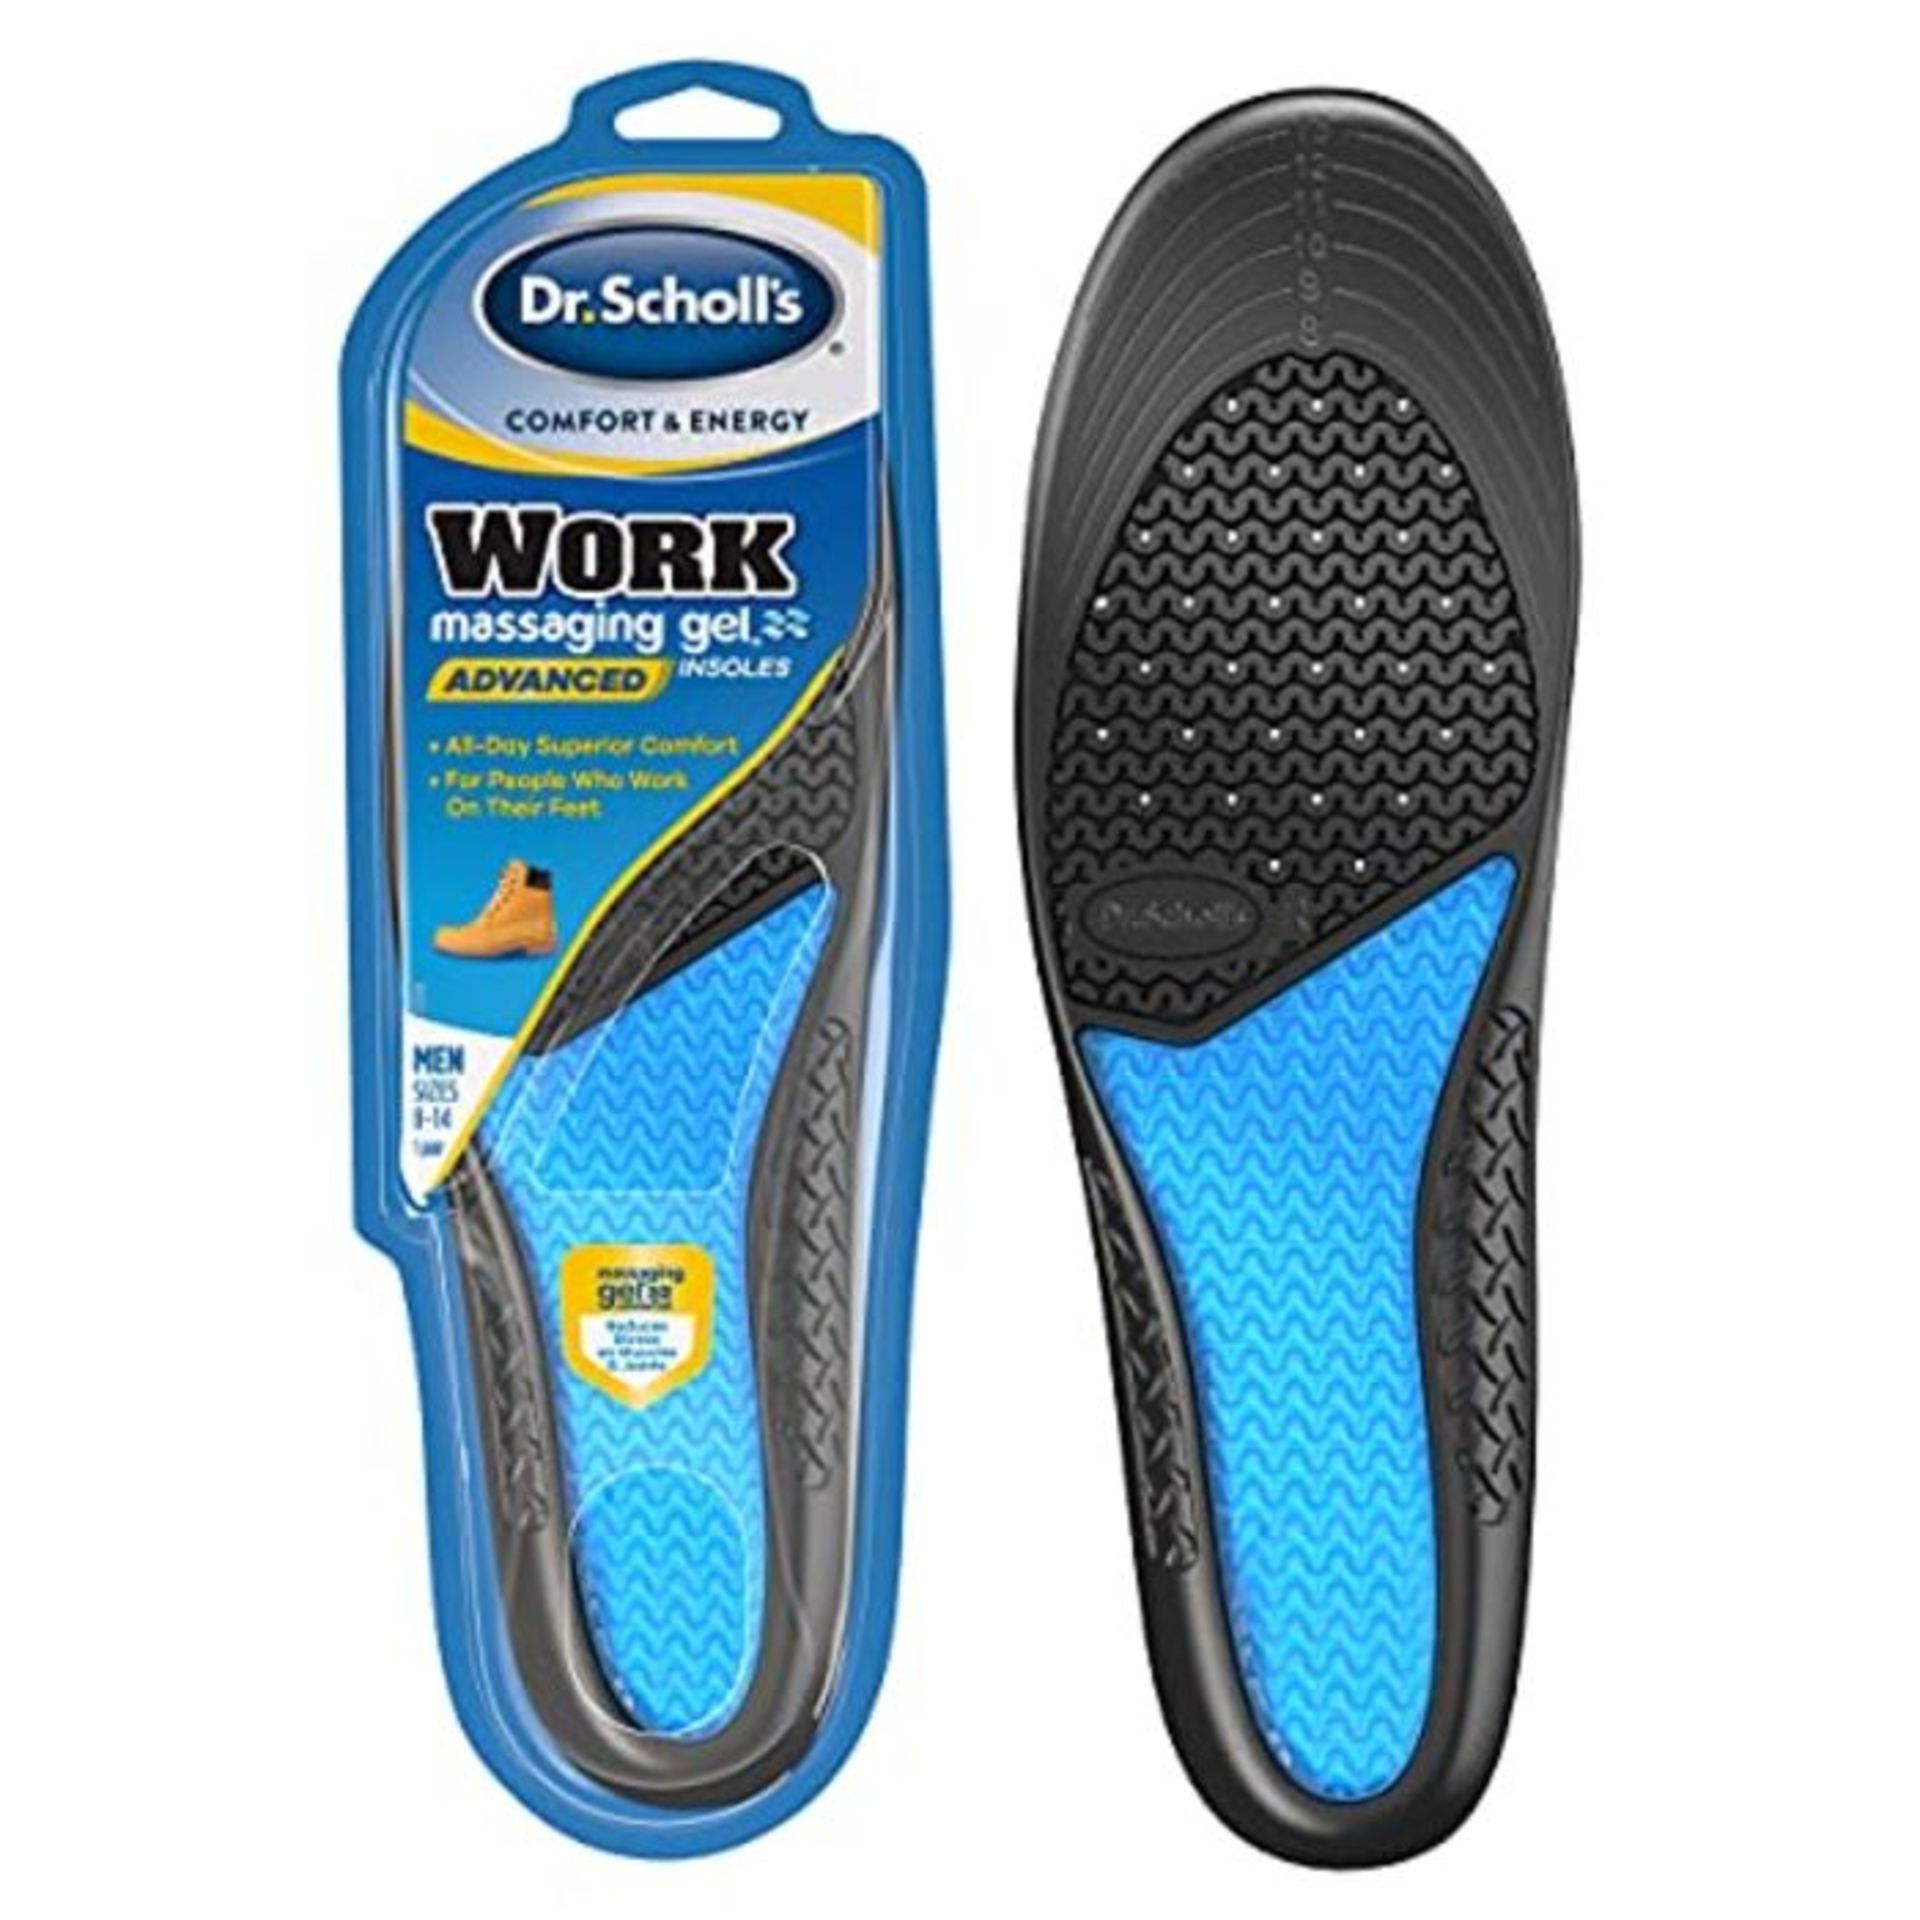 Dr. Scholl's 11017570110 Comfort and Energy Work Insoles for Men, 1 Pair, Size 8-14